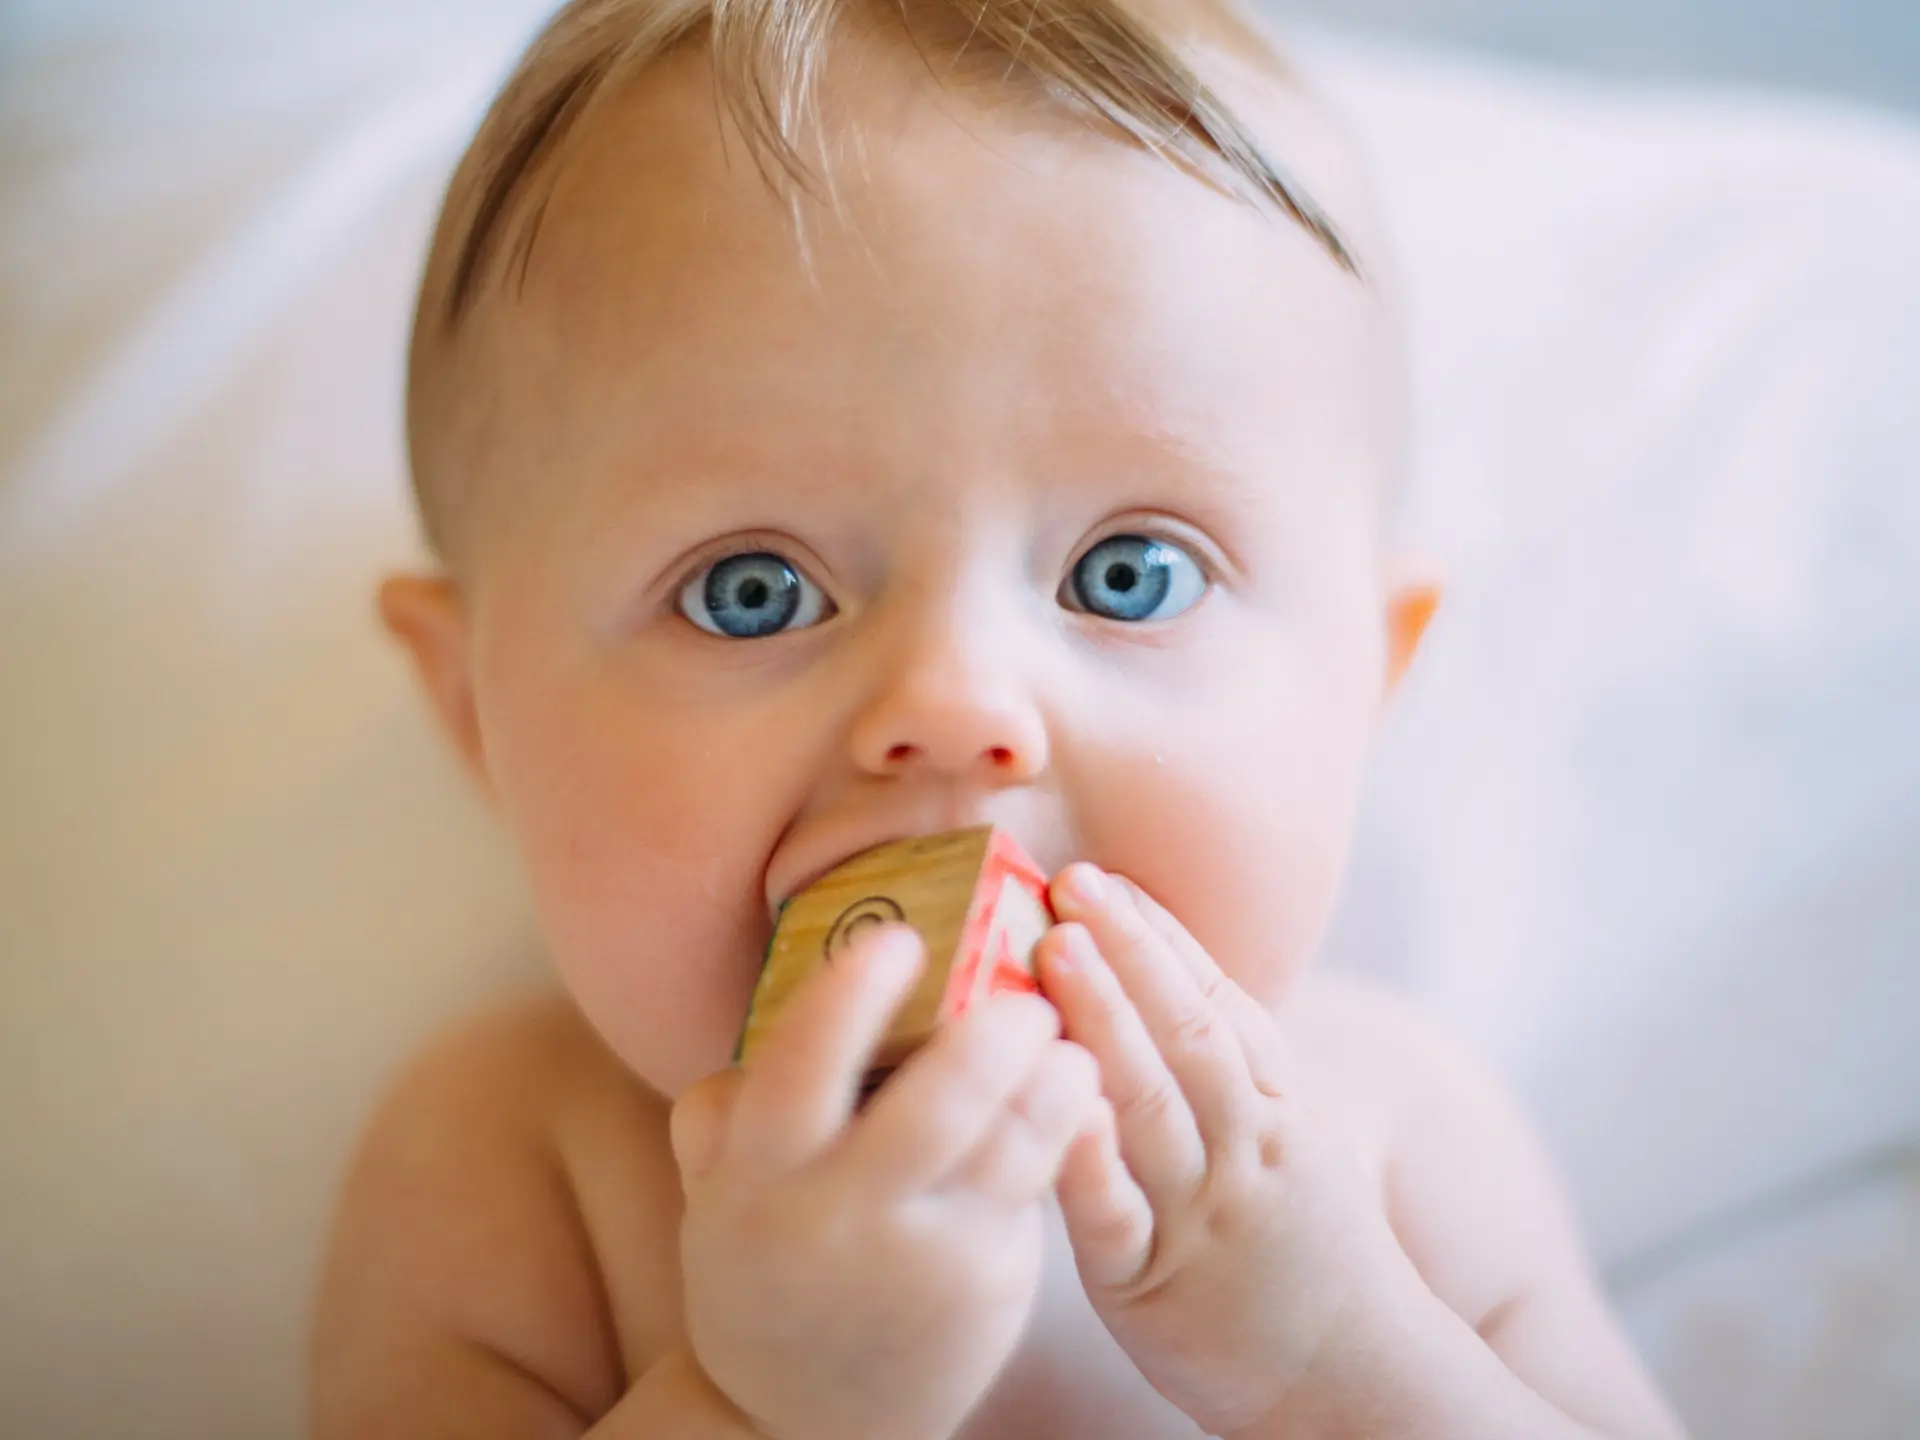 child with toy in its mouth